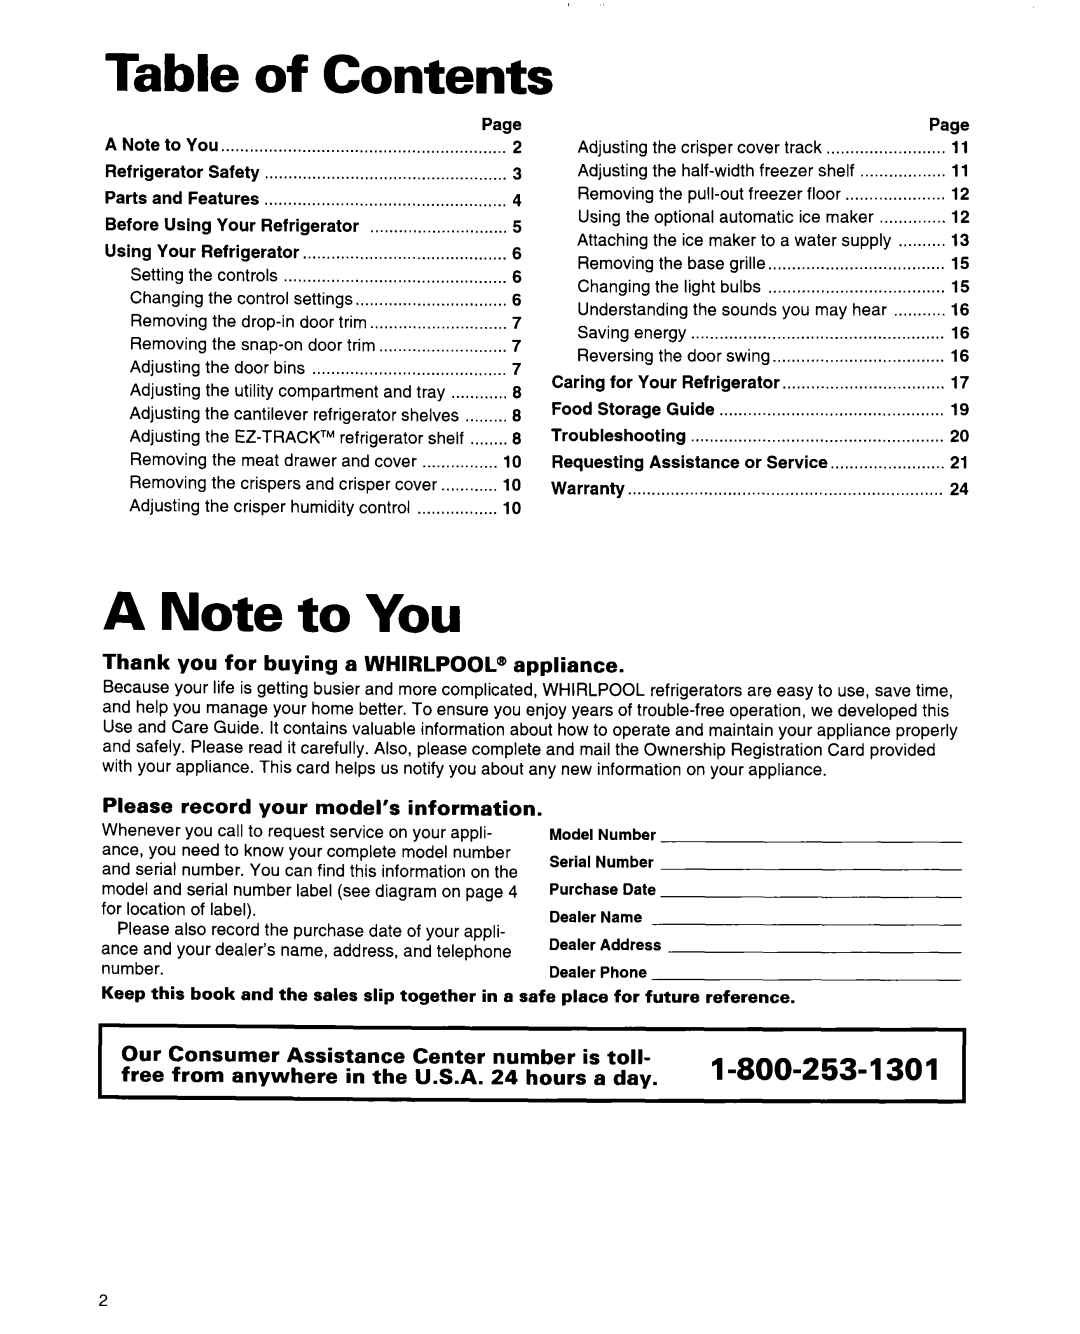 Whirlpool 2184589 warranty A Note to You, Contents 